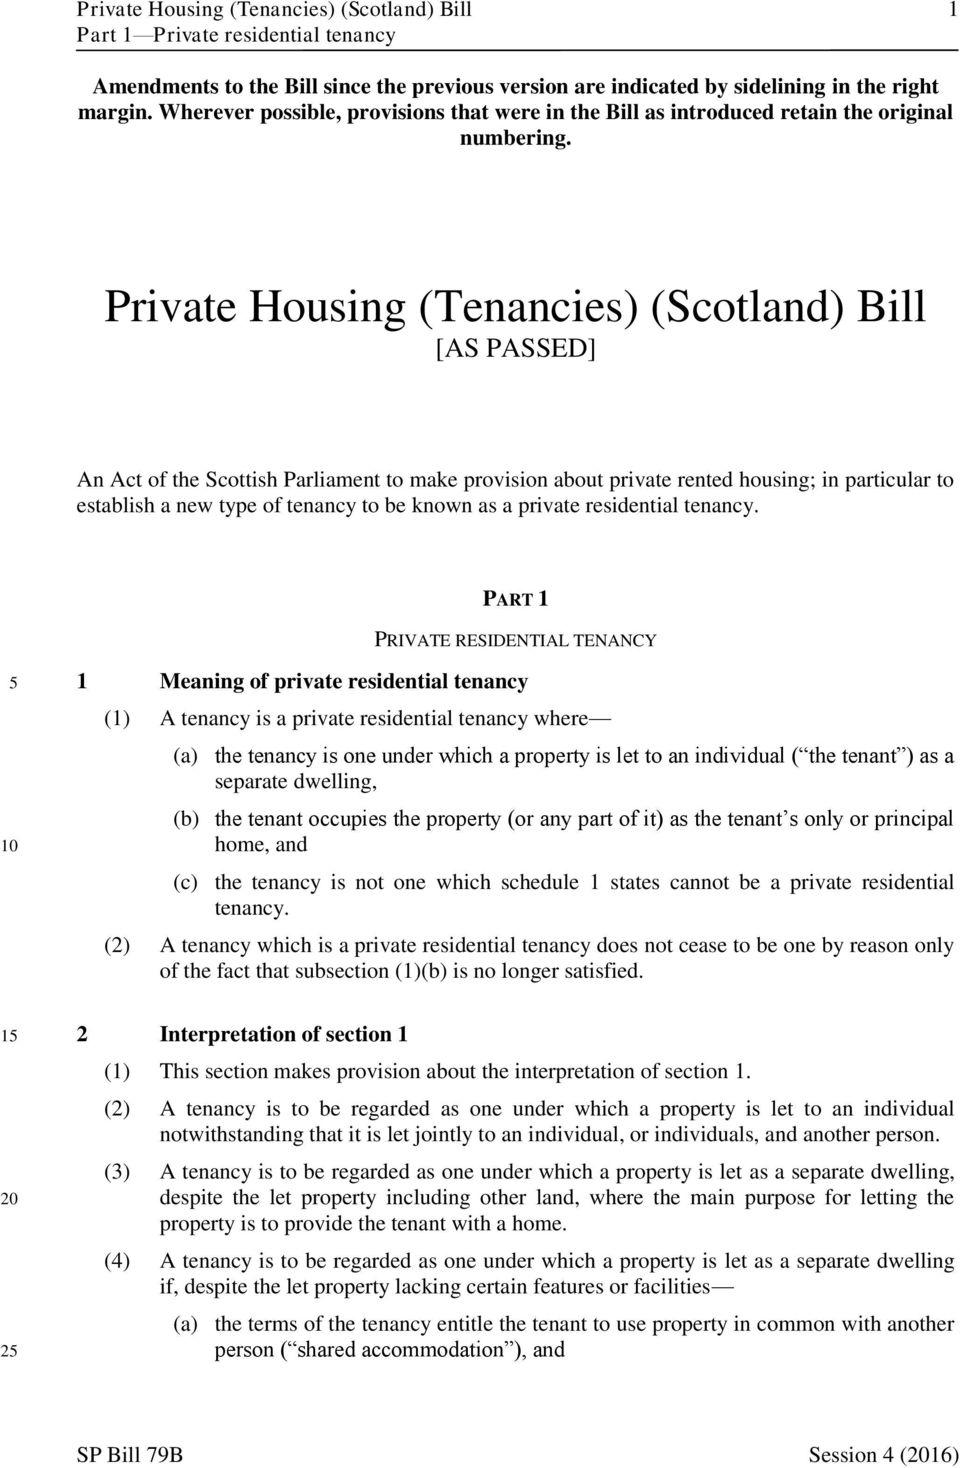 Private Housing (Tenancies) (Scotland) Bill [AS PASSED] An Act of the Scottish Parliament to make provision about private rented housing; in particular to establish a new type of tenancy to be known